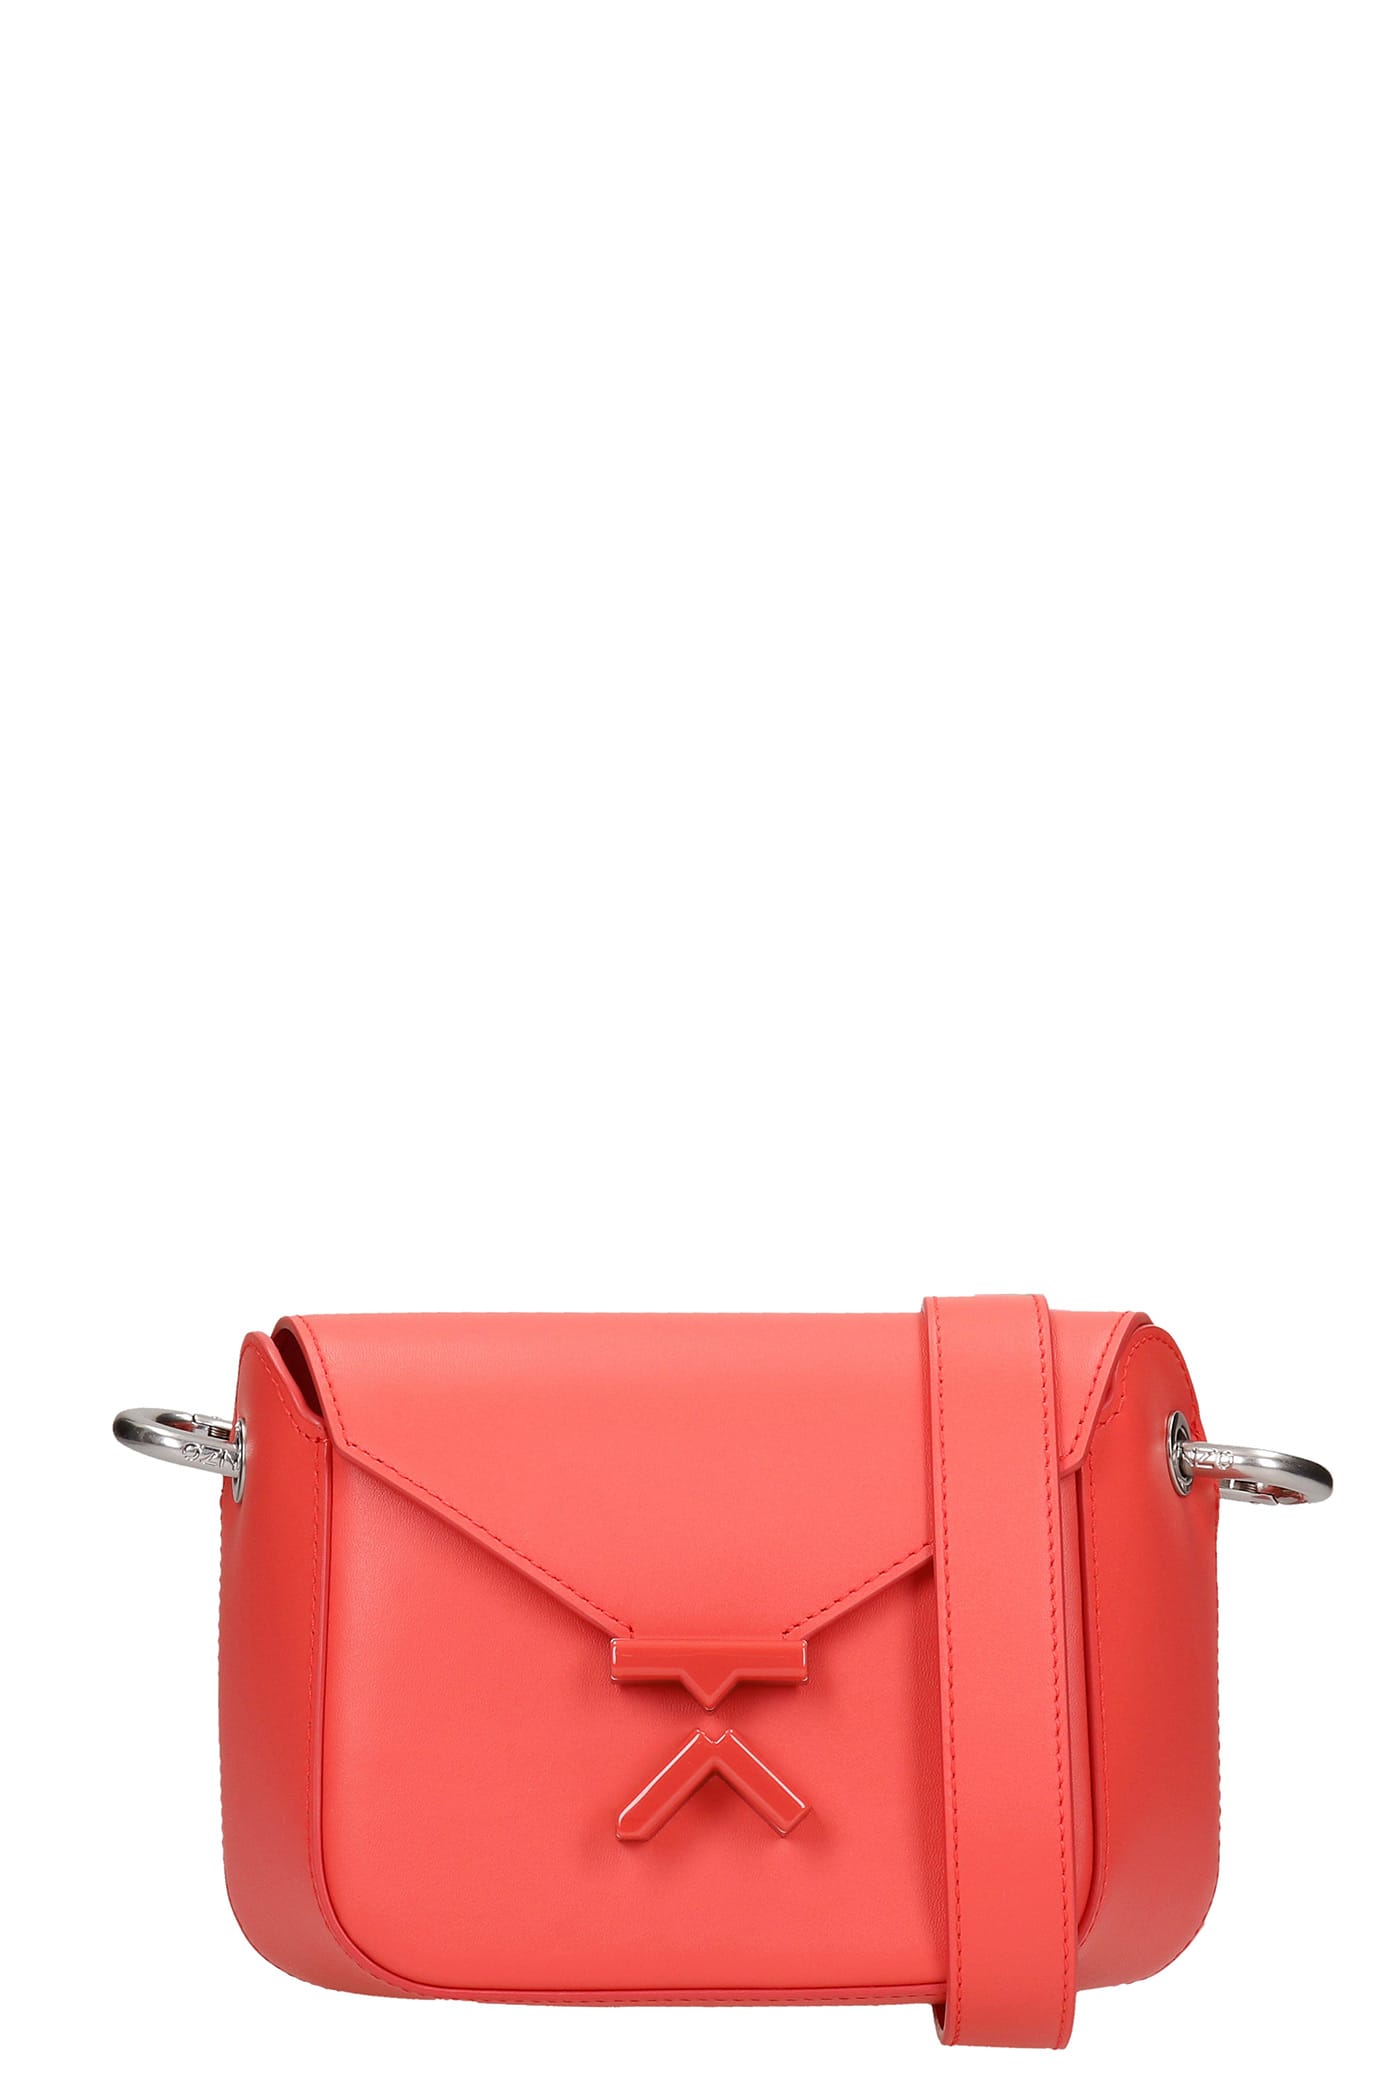 Kenzo Shoulder Bag In Red Leather